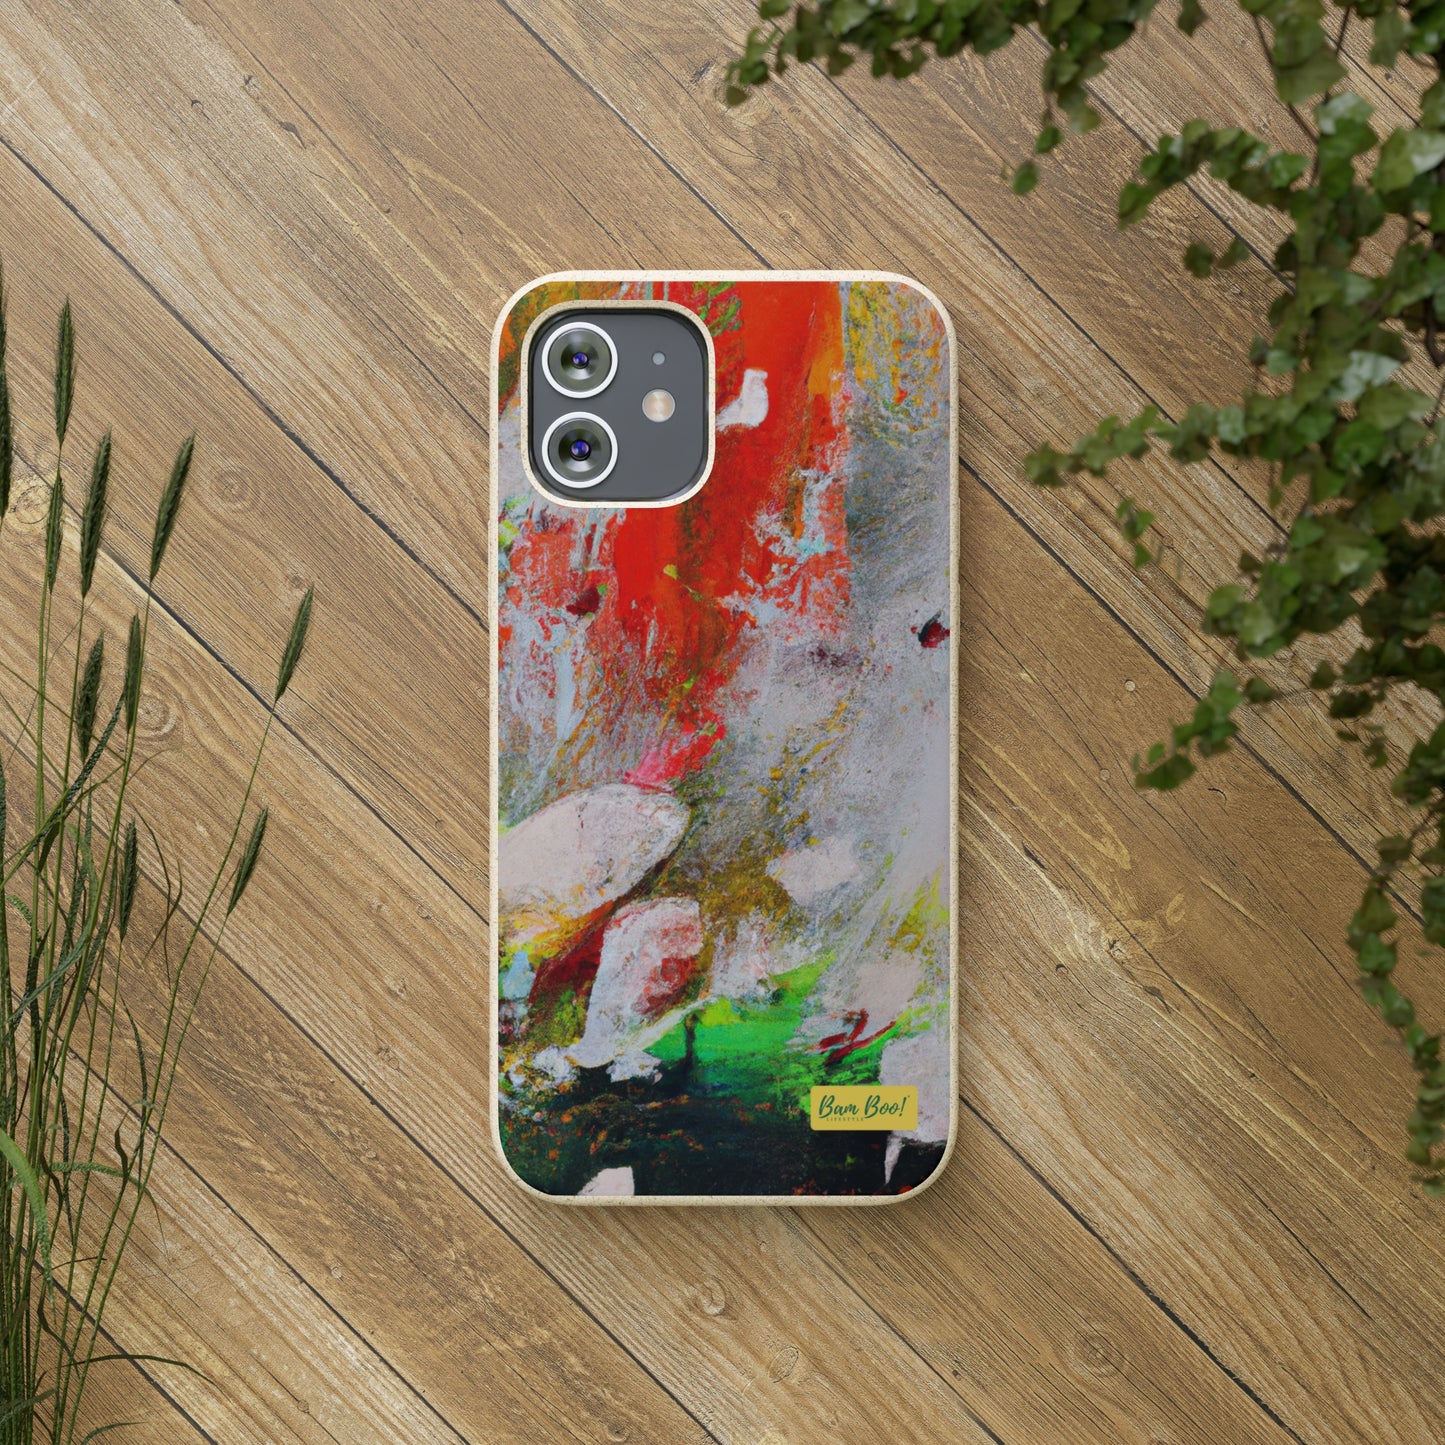 "Effective Expression: Exploring Abstract Painting with a Limited Color Palette" - Bam Boo! Lifestyle Eco-friendly Cases